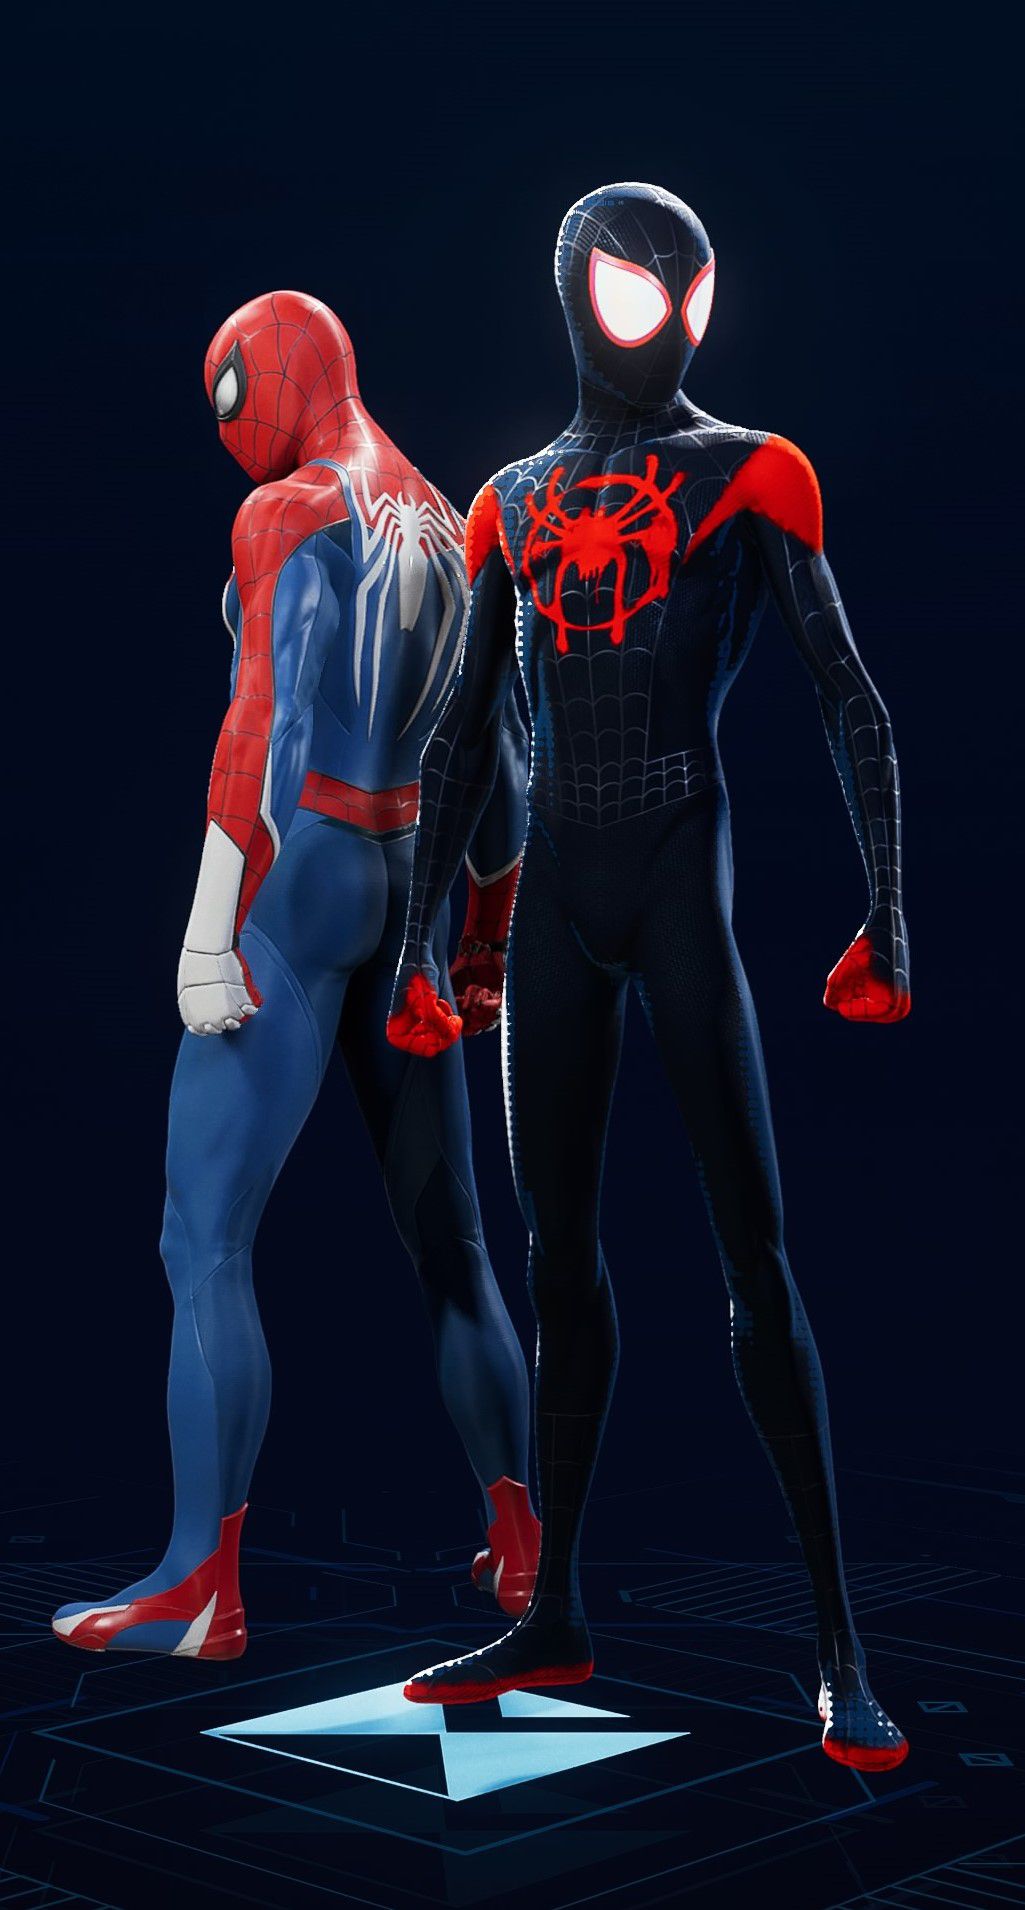 Miles Morales stands in his Into the Spider-Verse Suit in the suit selection screen of Spider-Man 2.